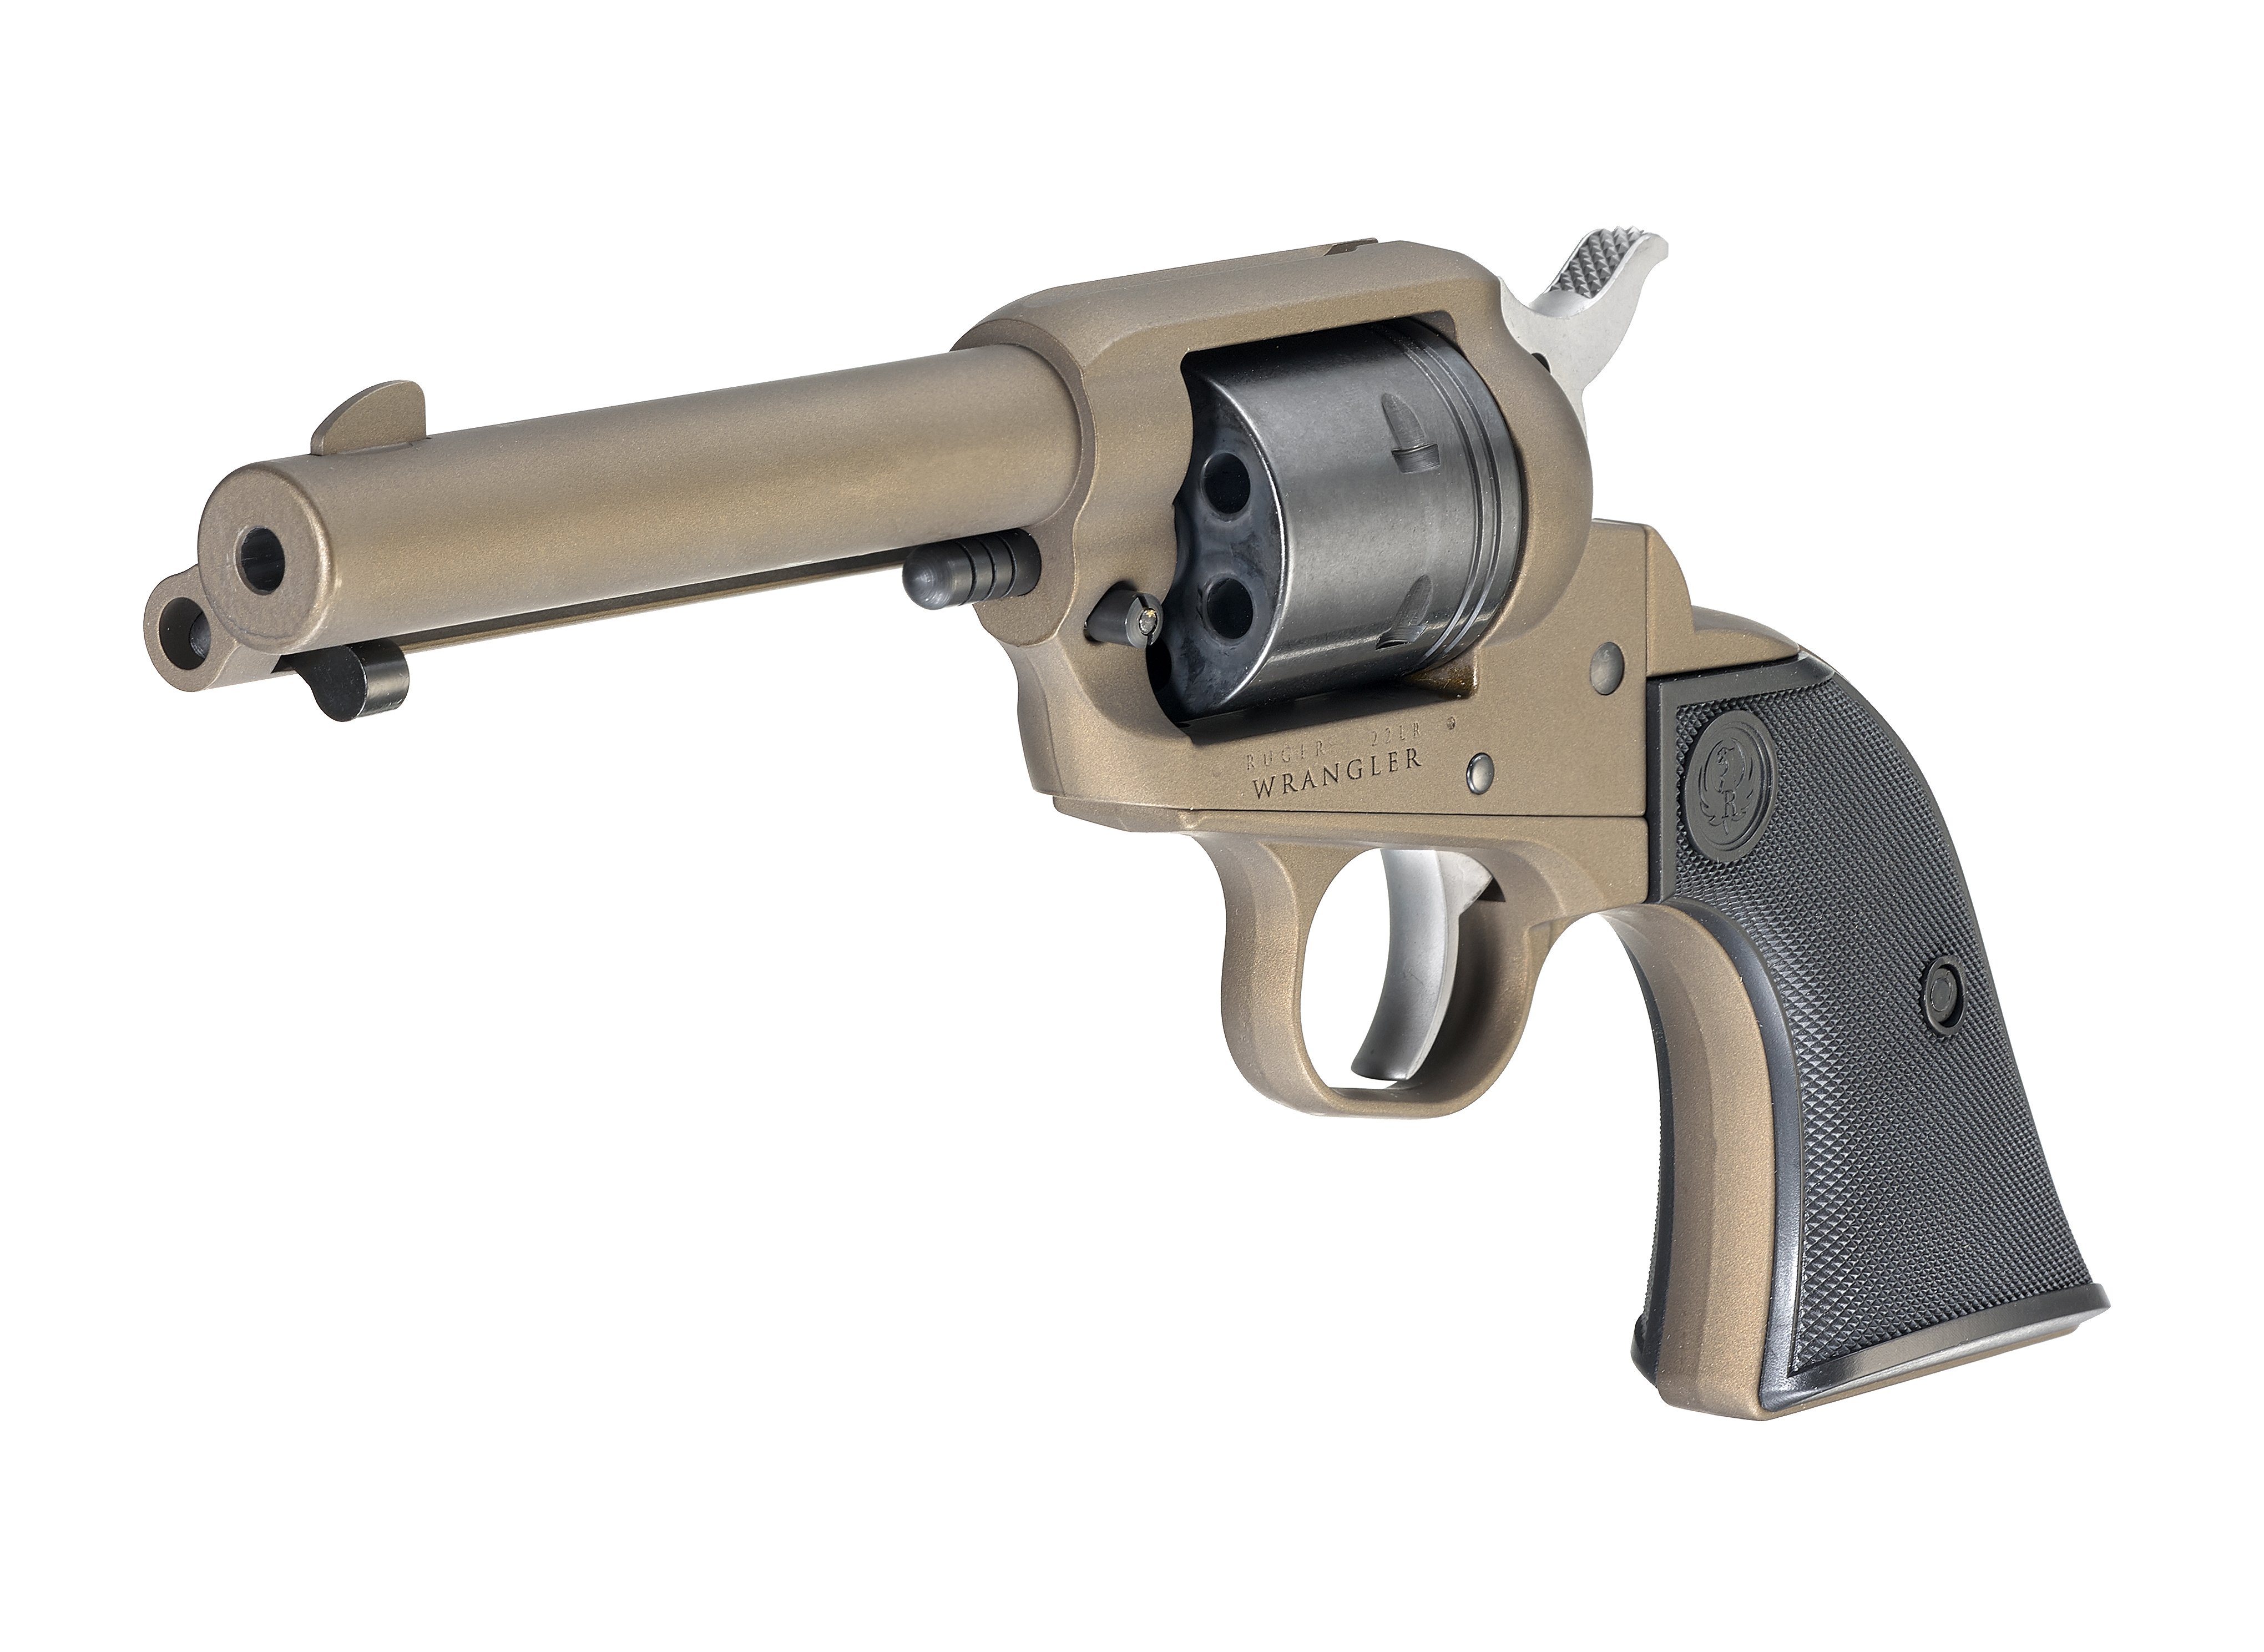 Ruger Wrangler - The Perfect Gun For New Shooters & Trainers?